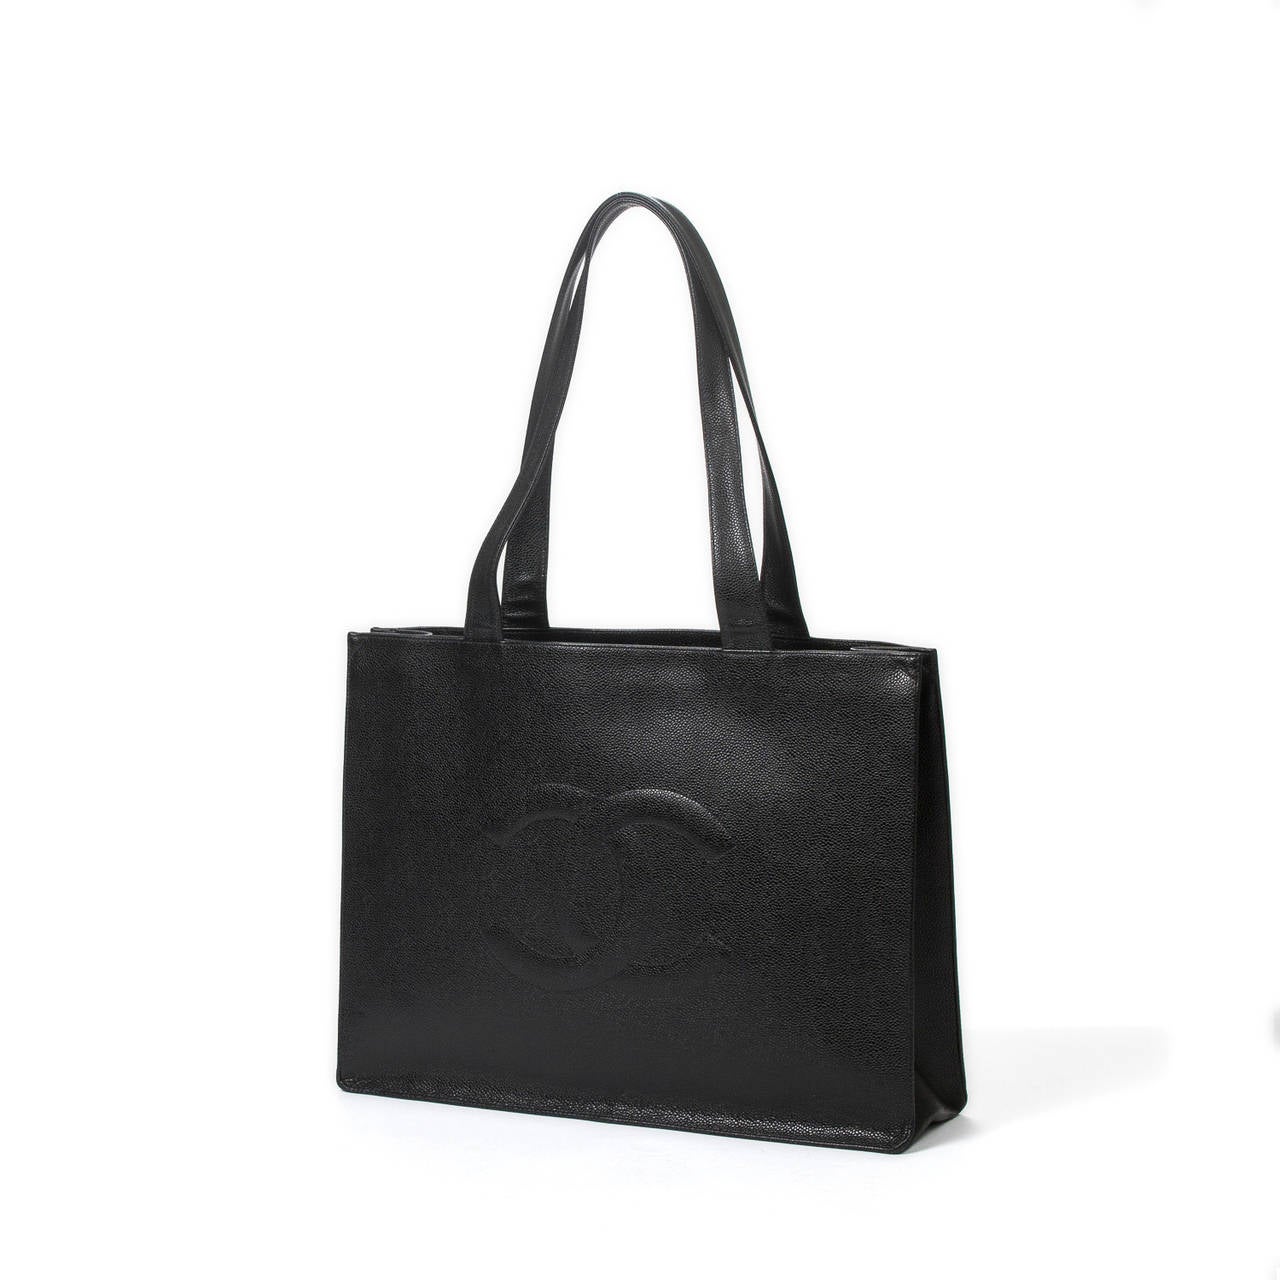 Vintage tote bag in black caviar leather with front logo. Black leather interior with one zip pocket and authentification sticker. Dustbag and authenticity card included. Perfect condition.